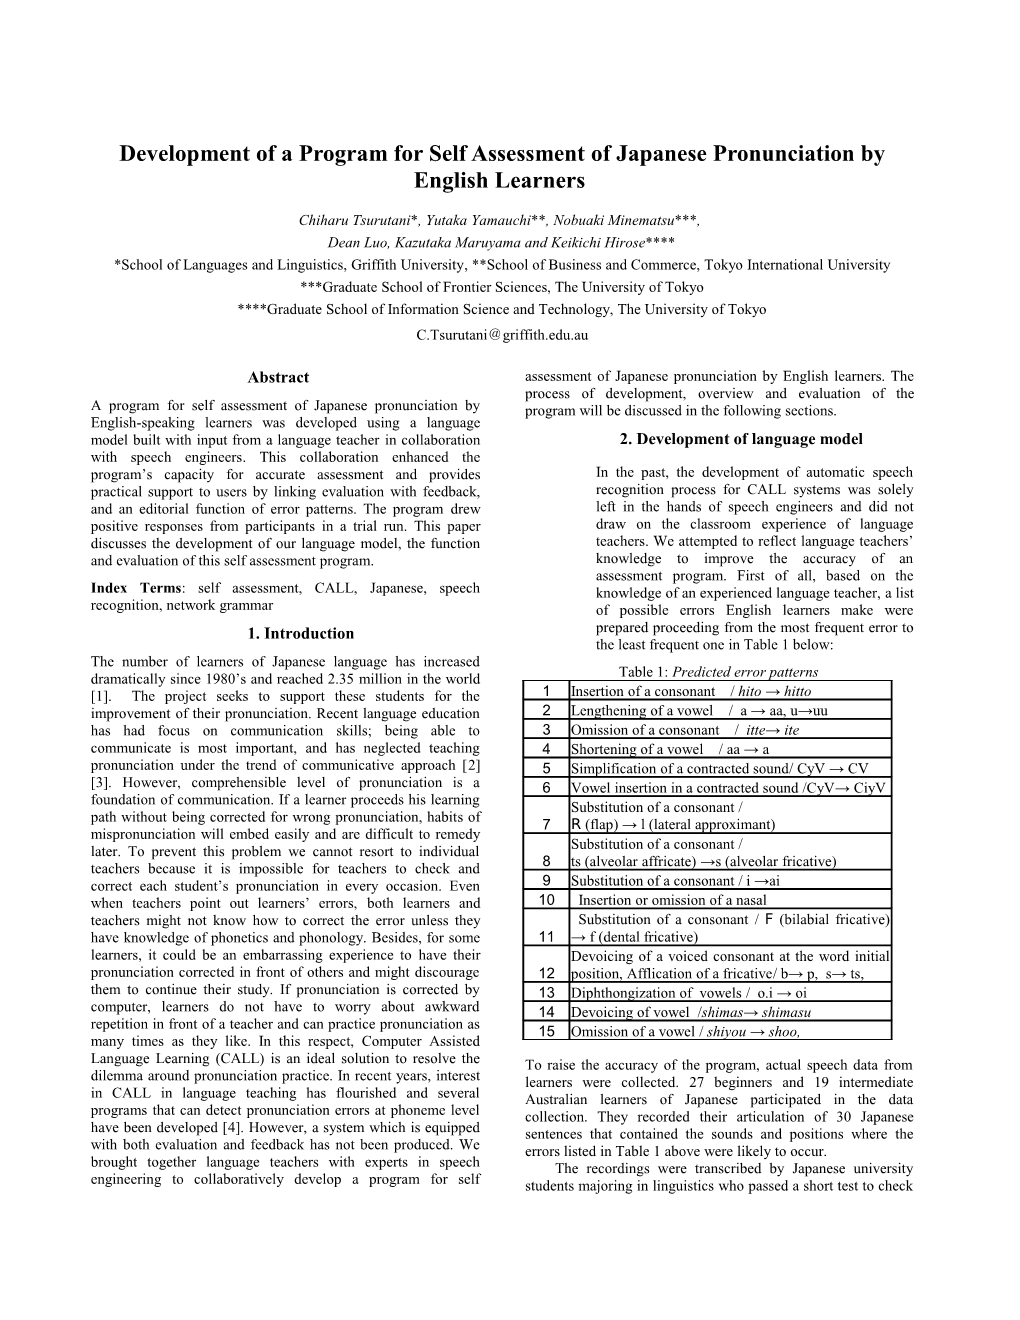 Development of a Program for Self Assessment of Japanese Pronunciation by English Learners